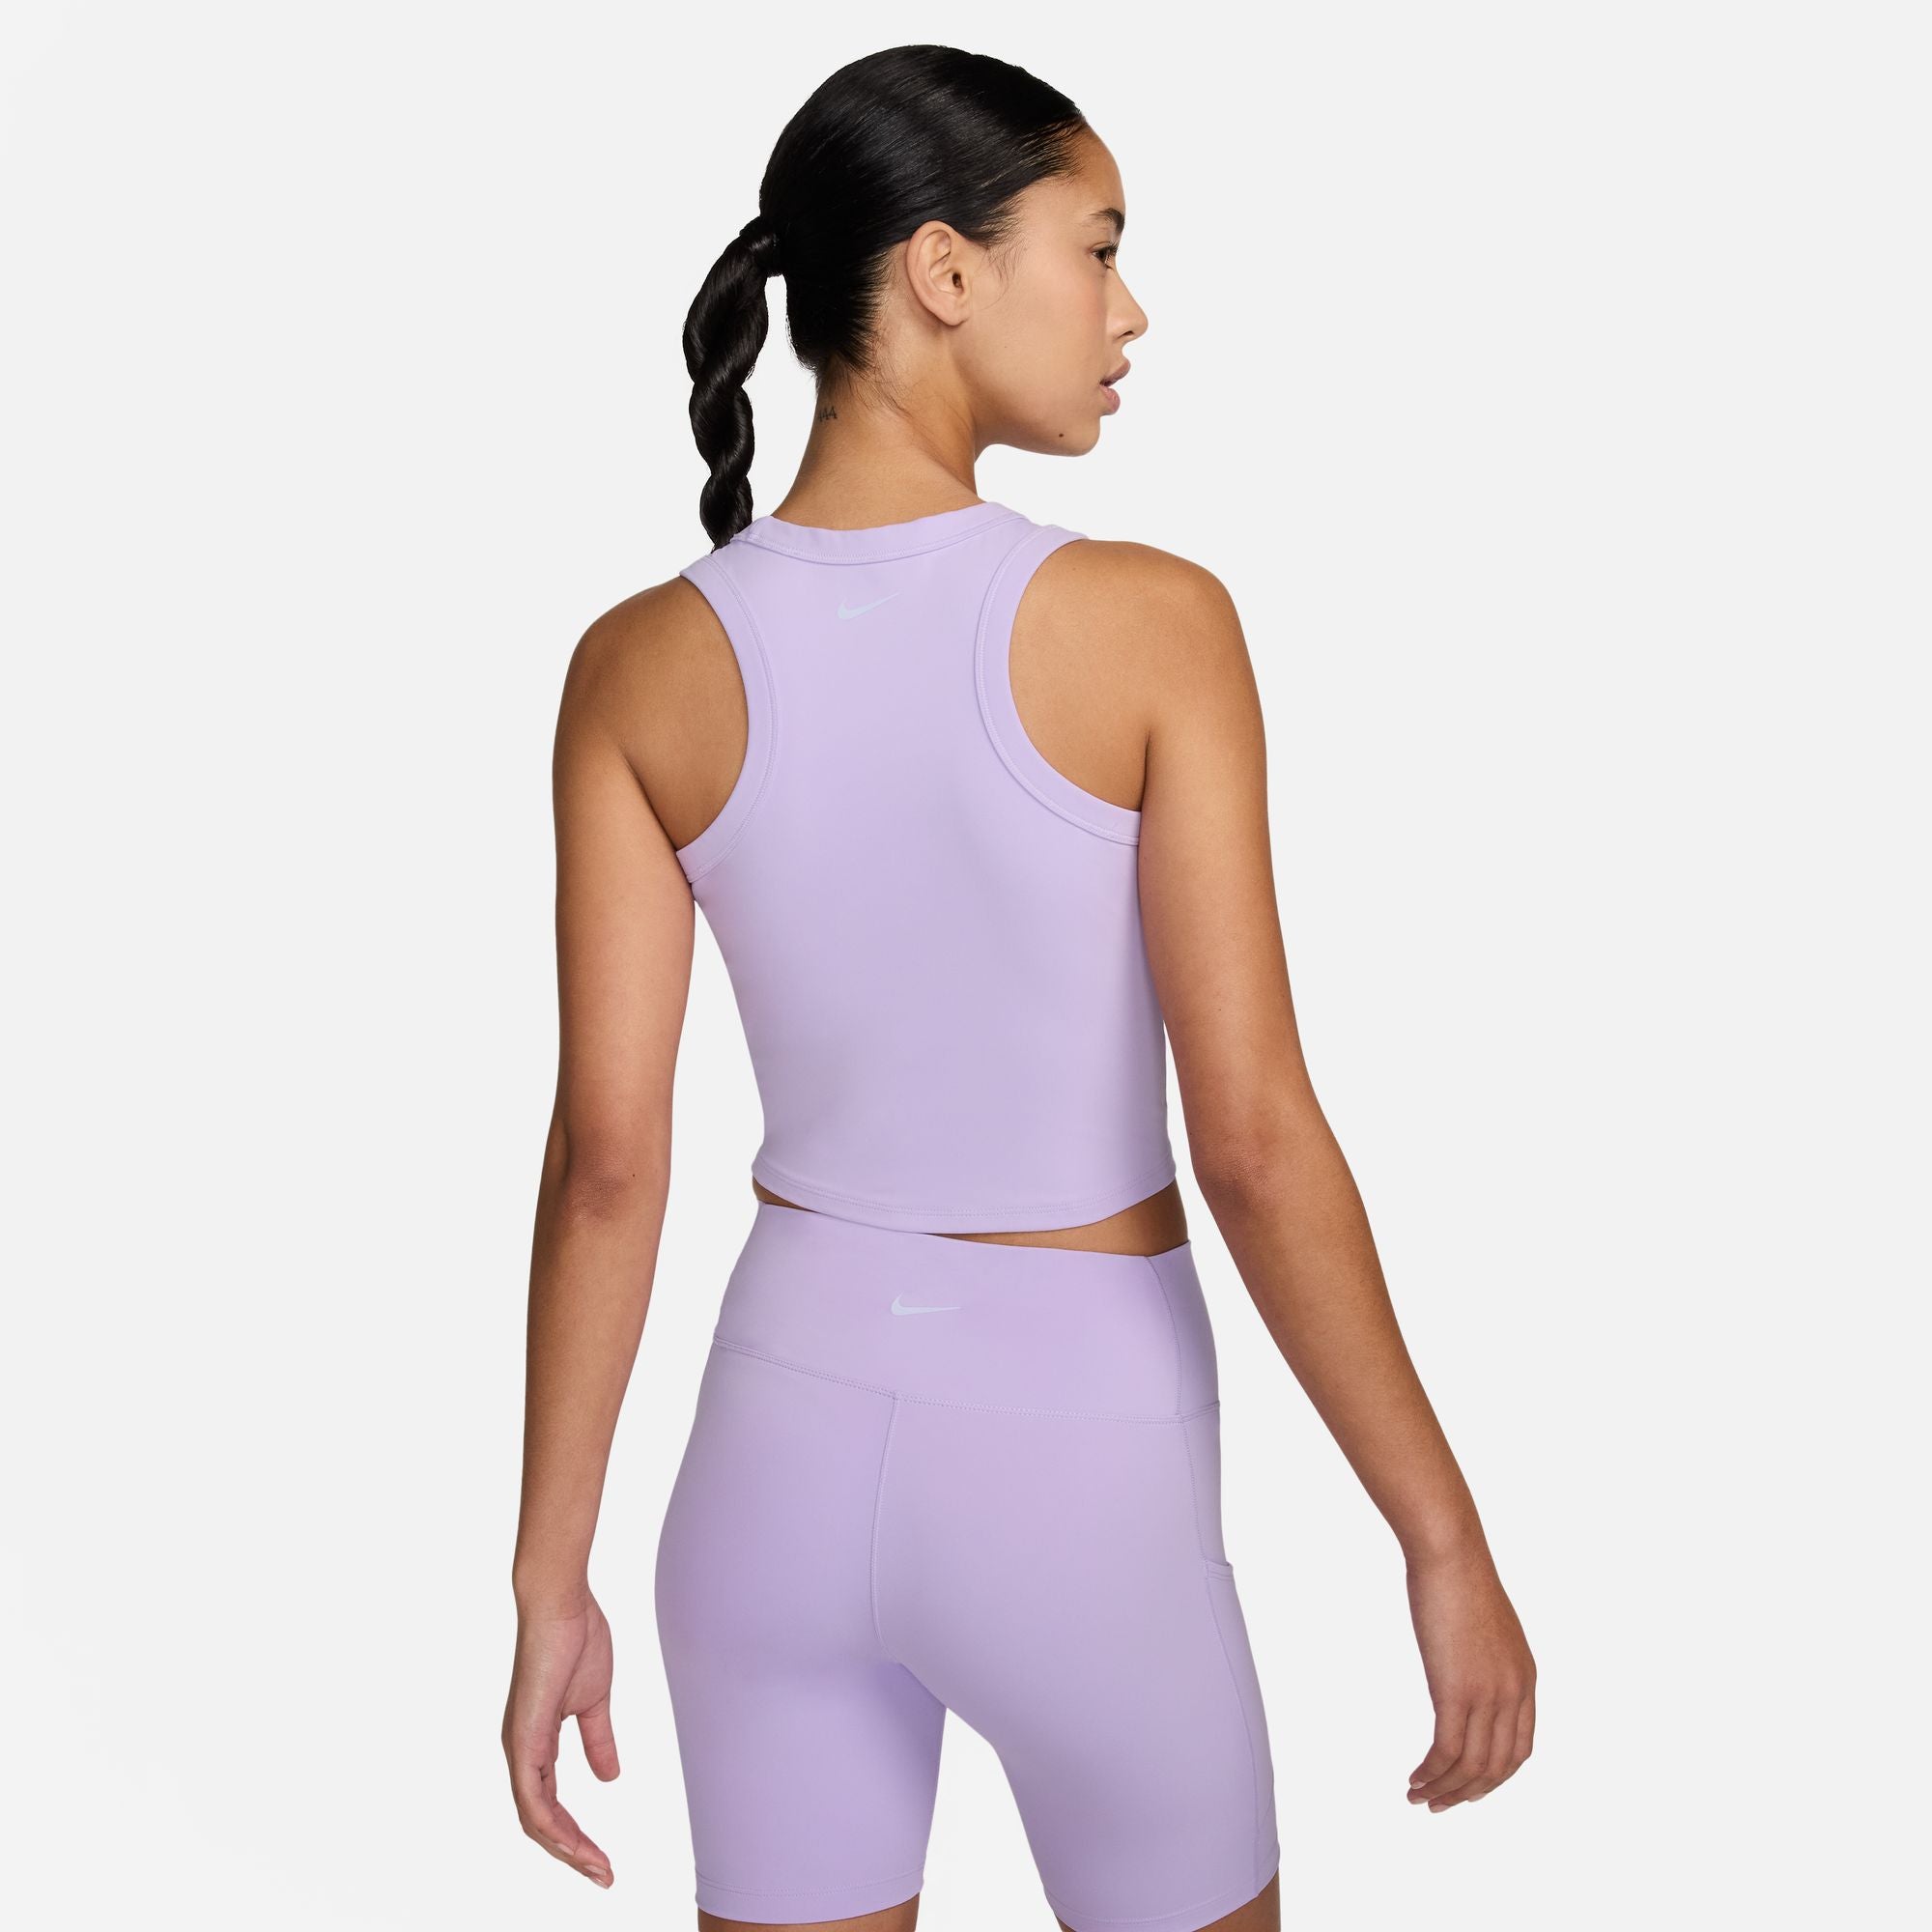 NIKE WOMEN'S ONE FITTED TANK - 512 LILAC BLOOM/BLACK 